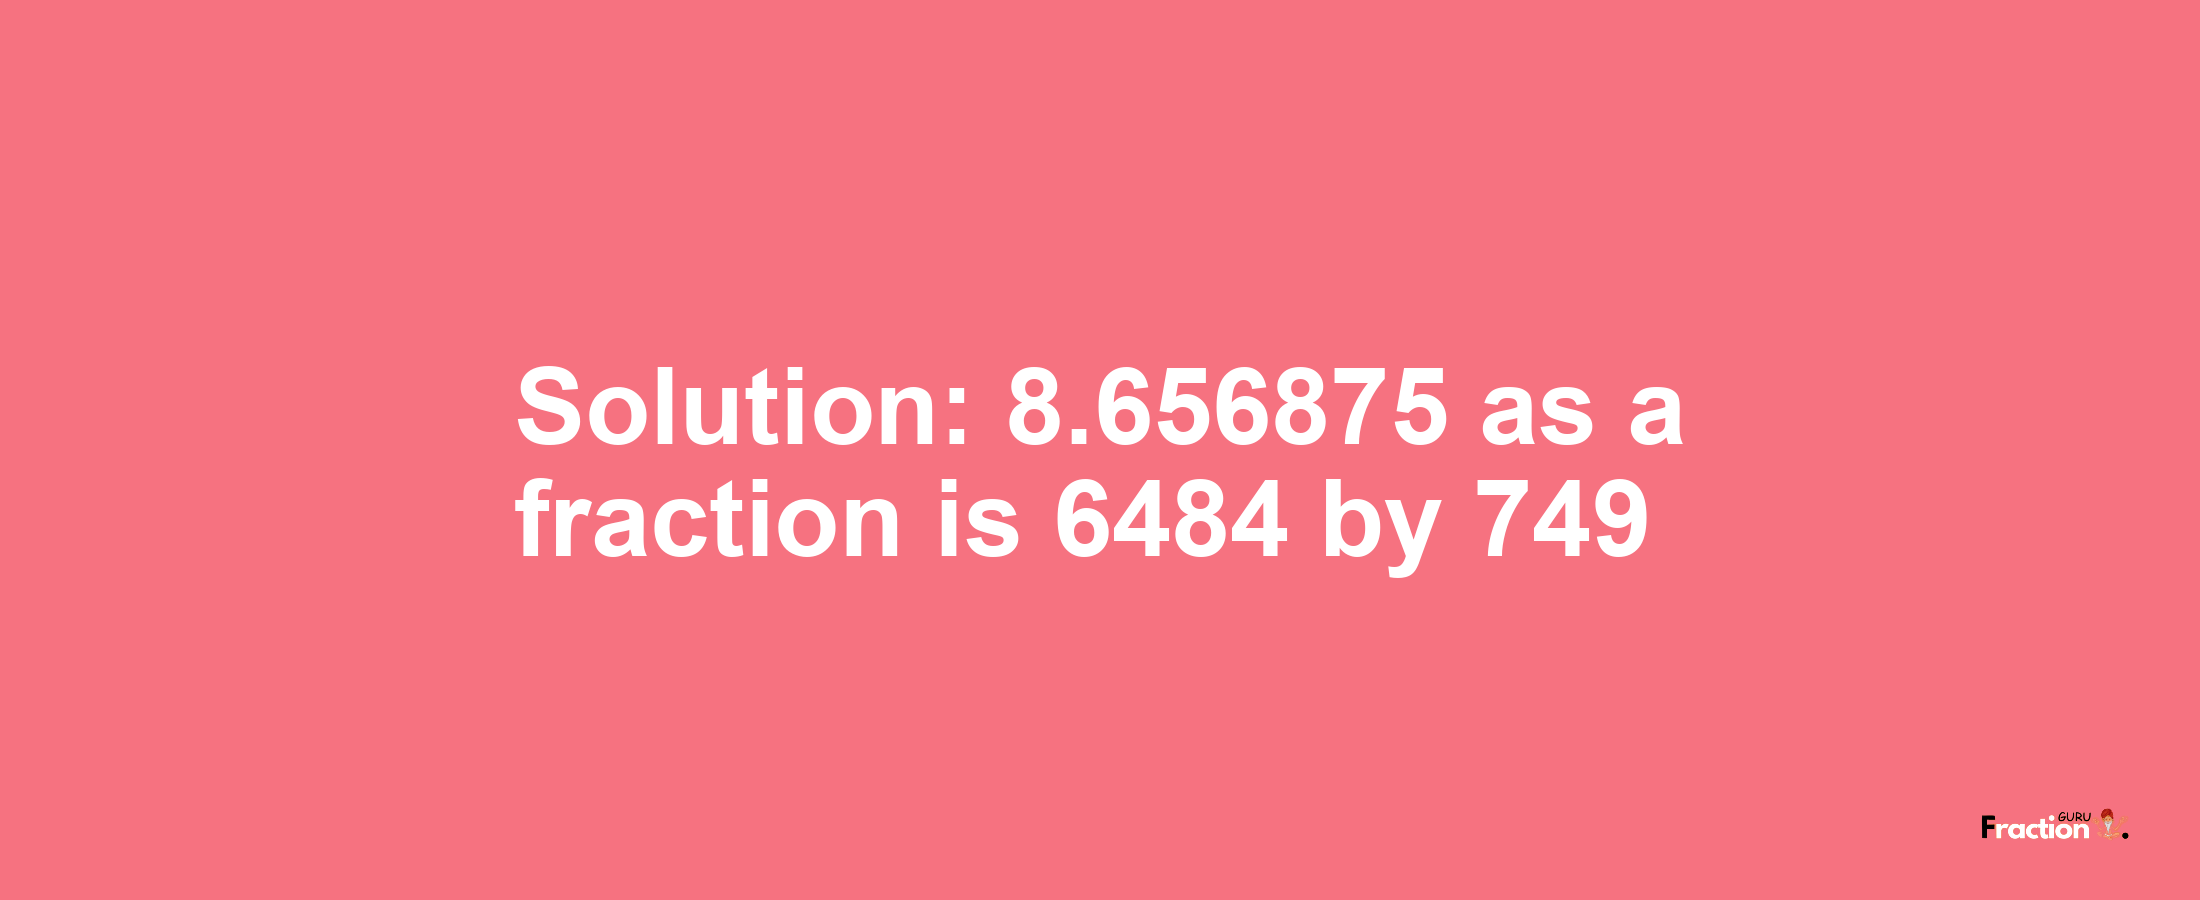 Solution:8.656875 as a fraction is 6484/749